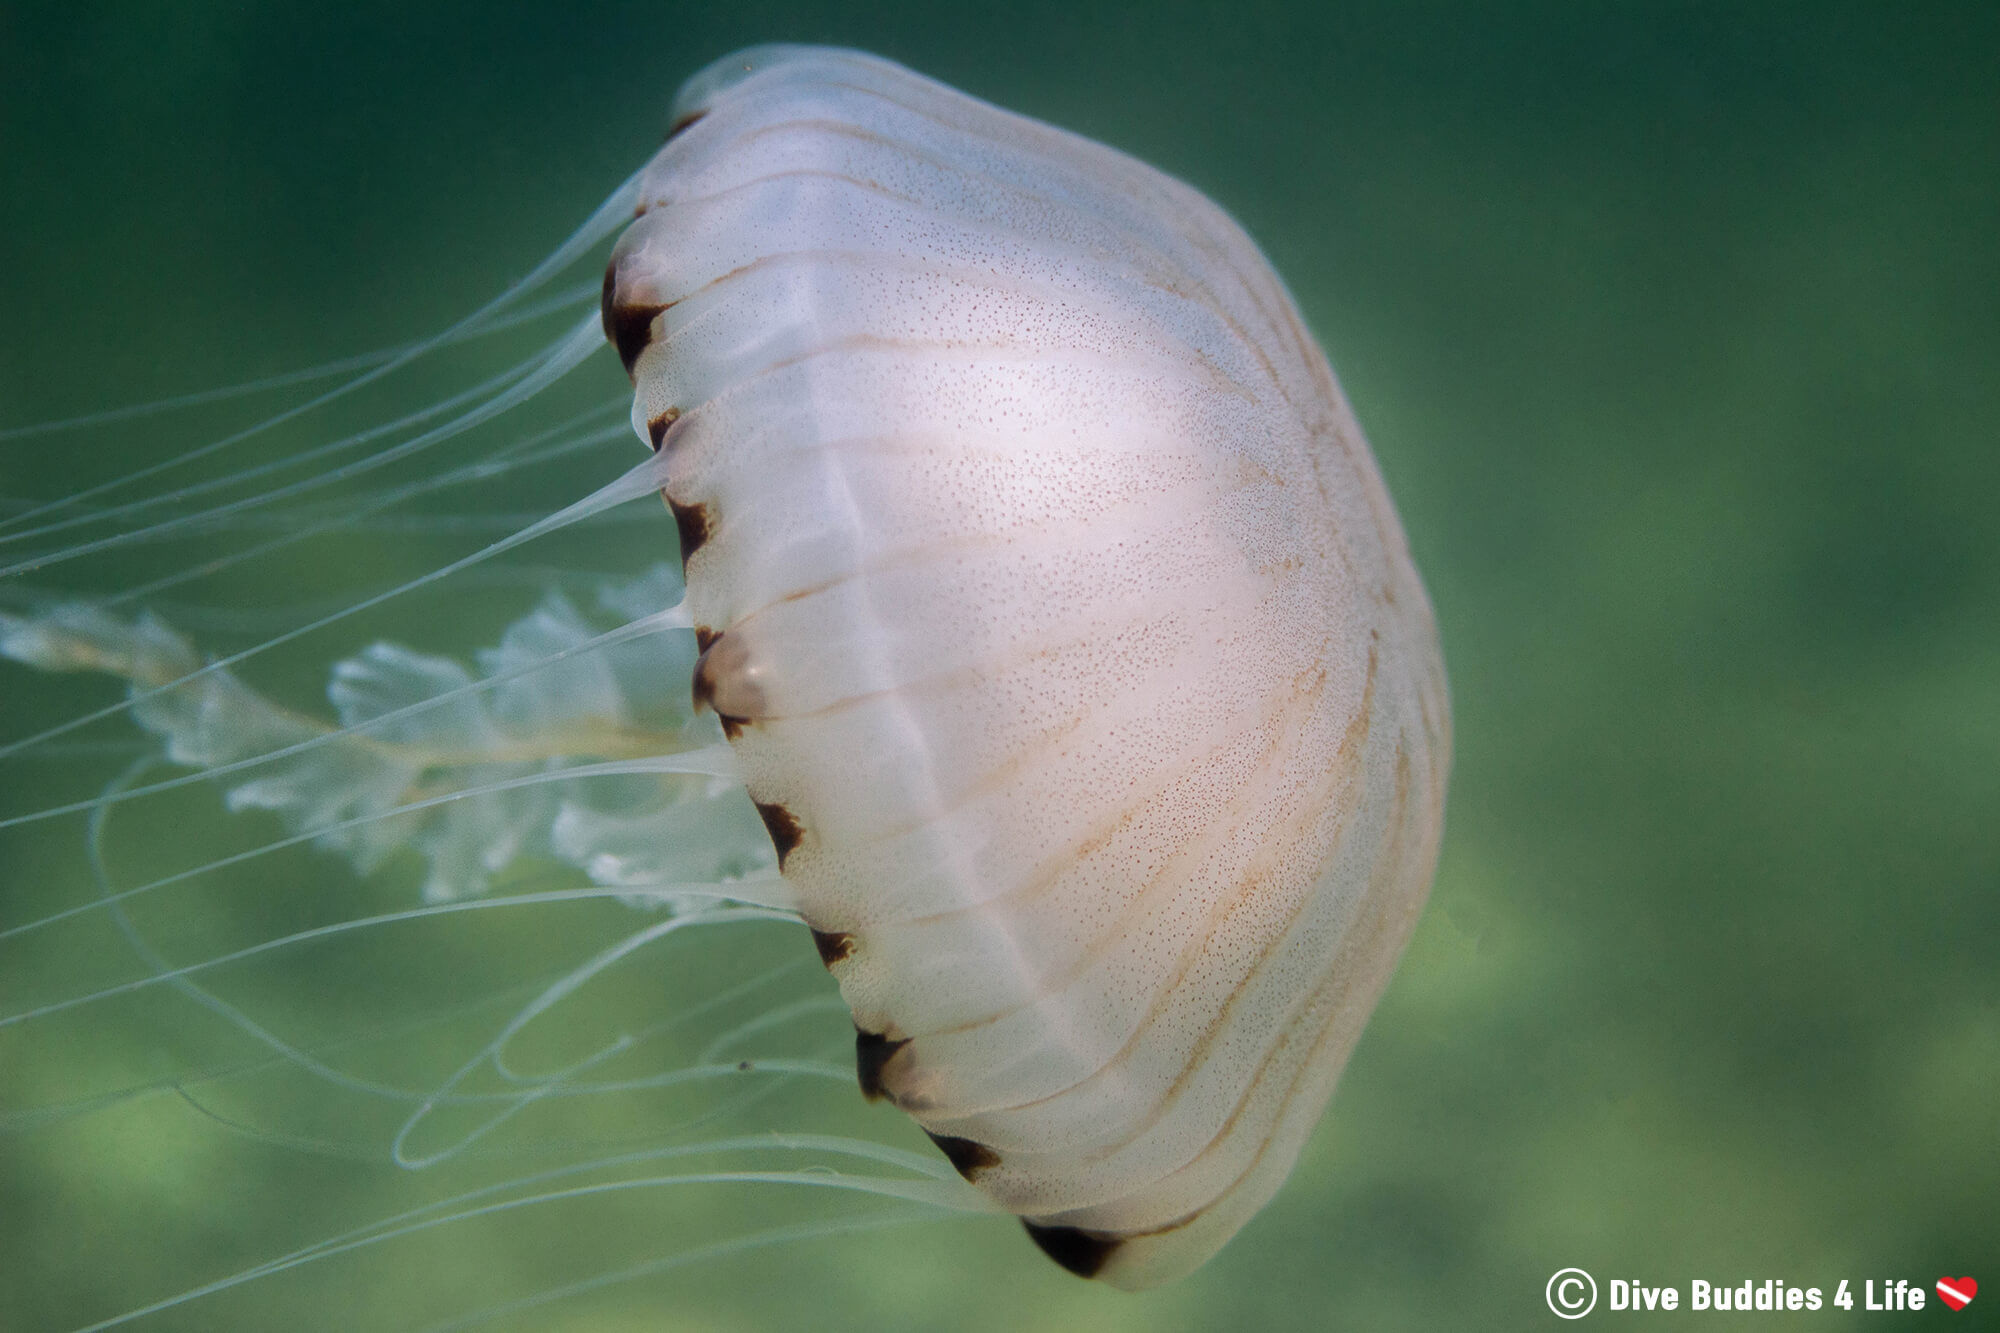 Scuba Diving With A Jellyfish In The Dutch Grevelingen Lake, Netherlands